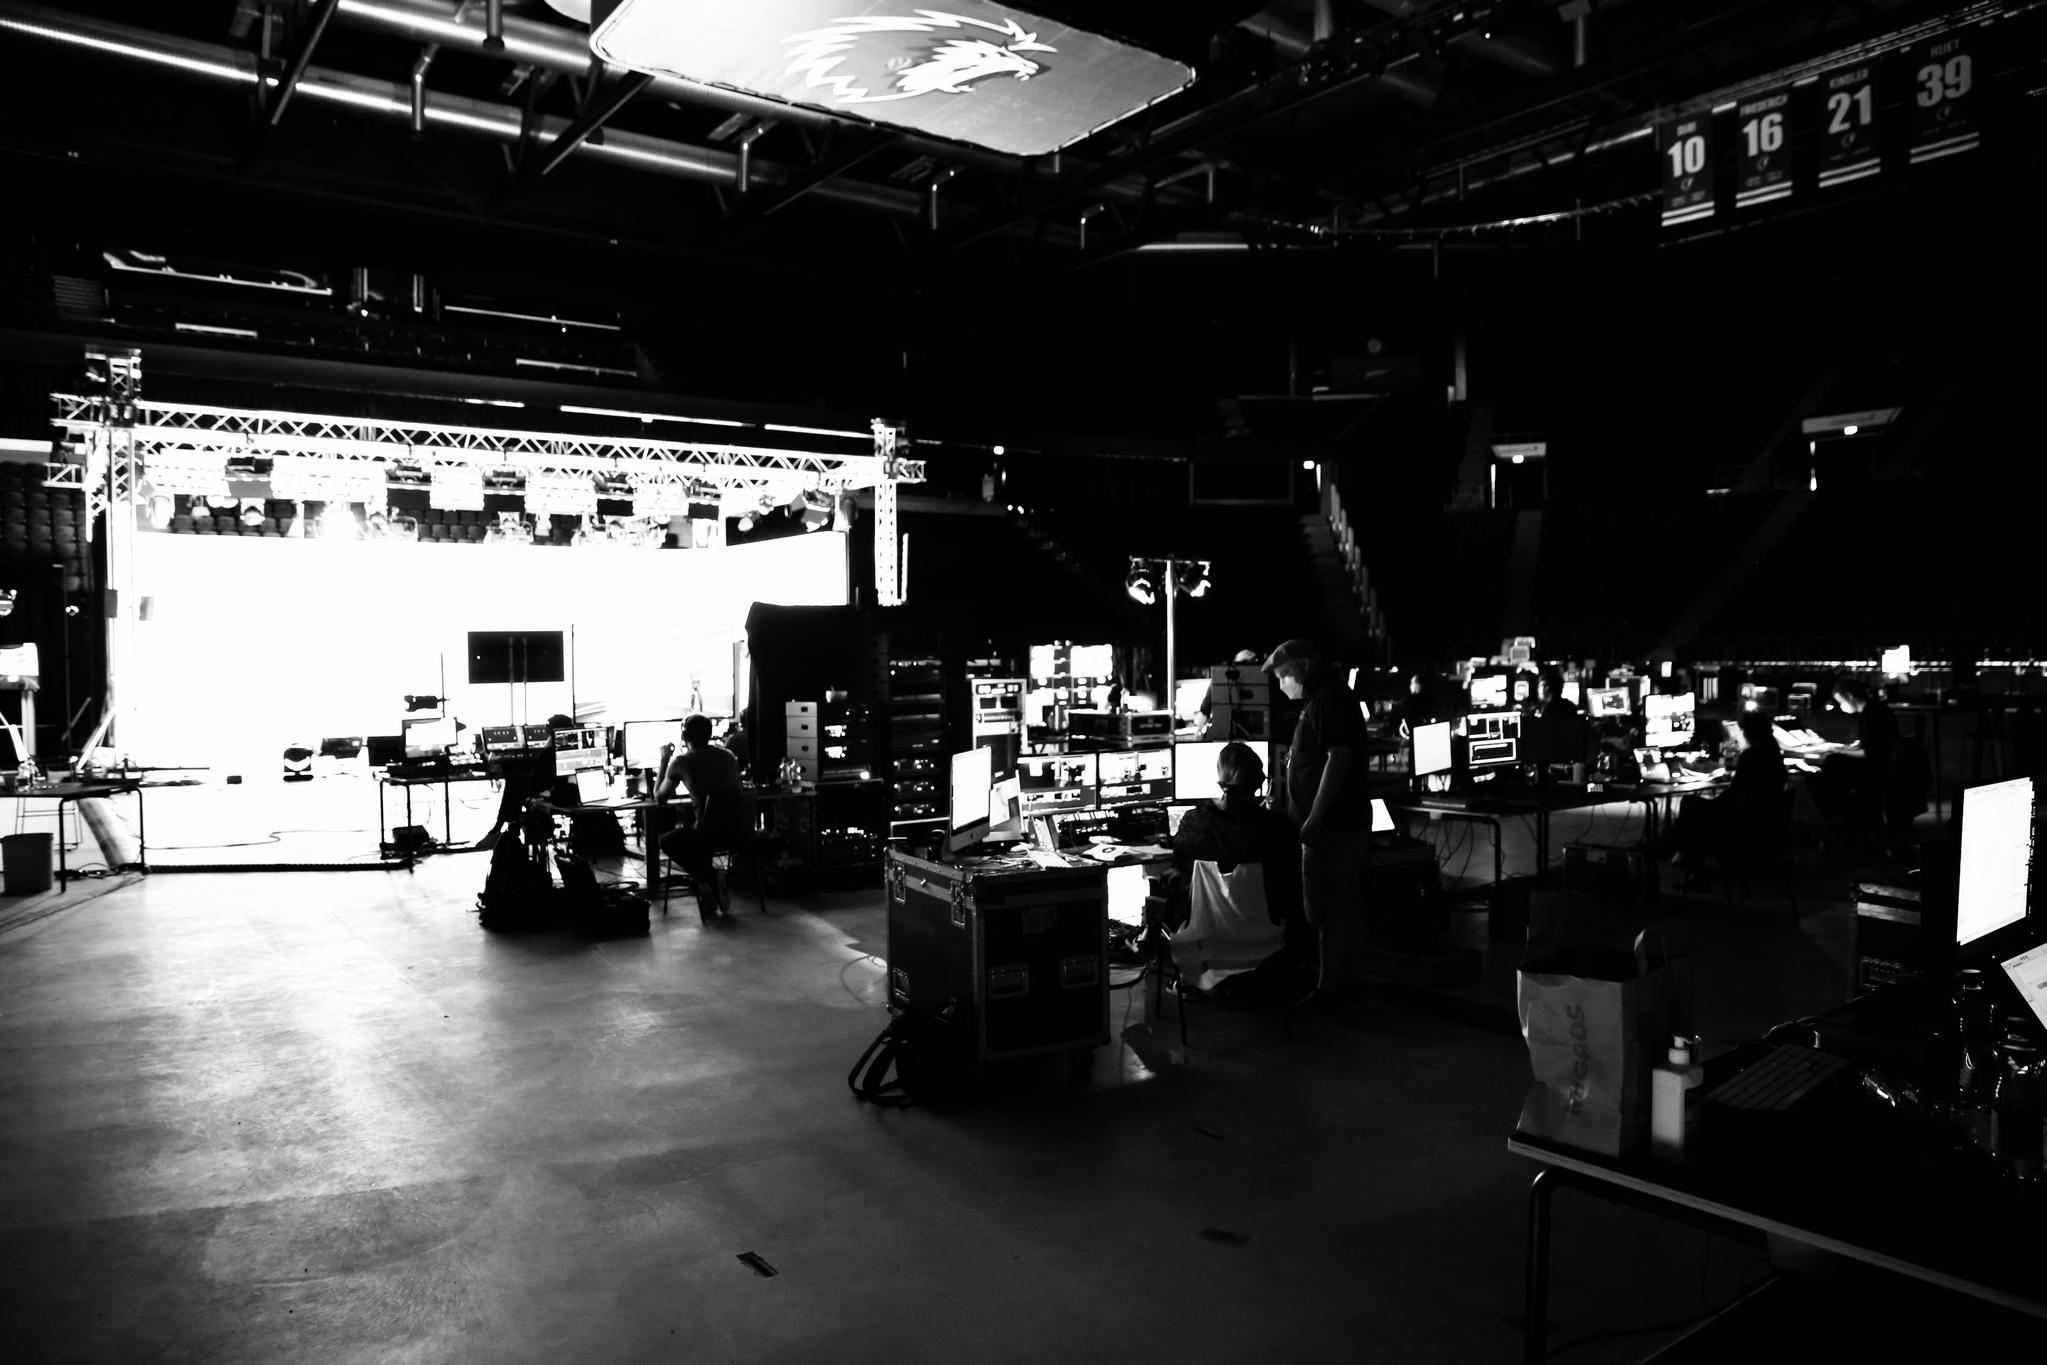 Many monitors face towards a soundstage and the technical crew operates them.